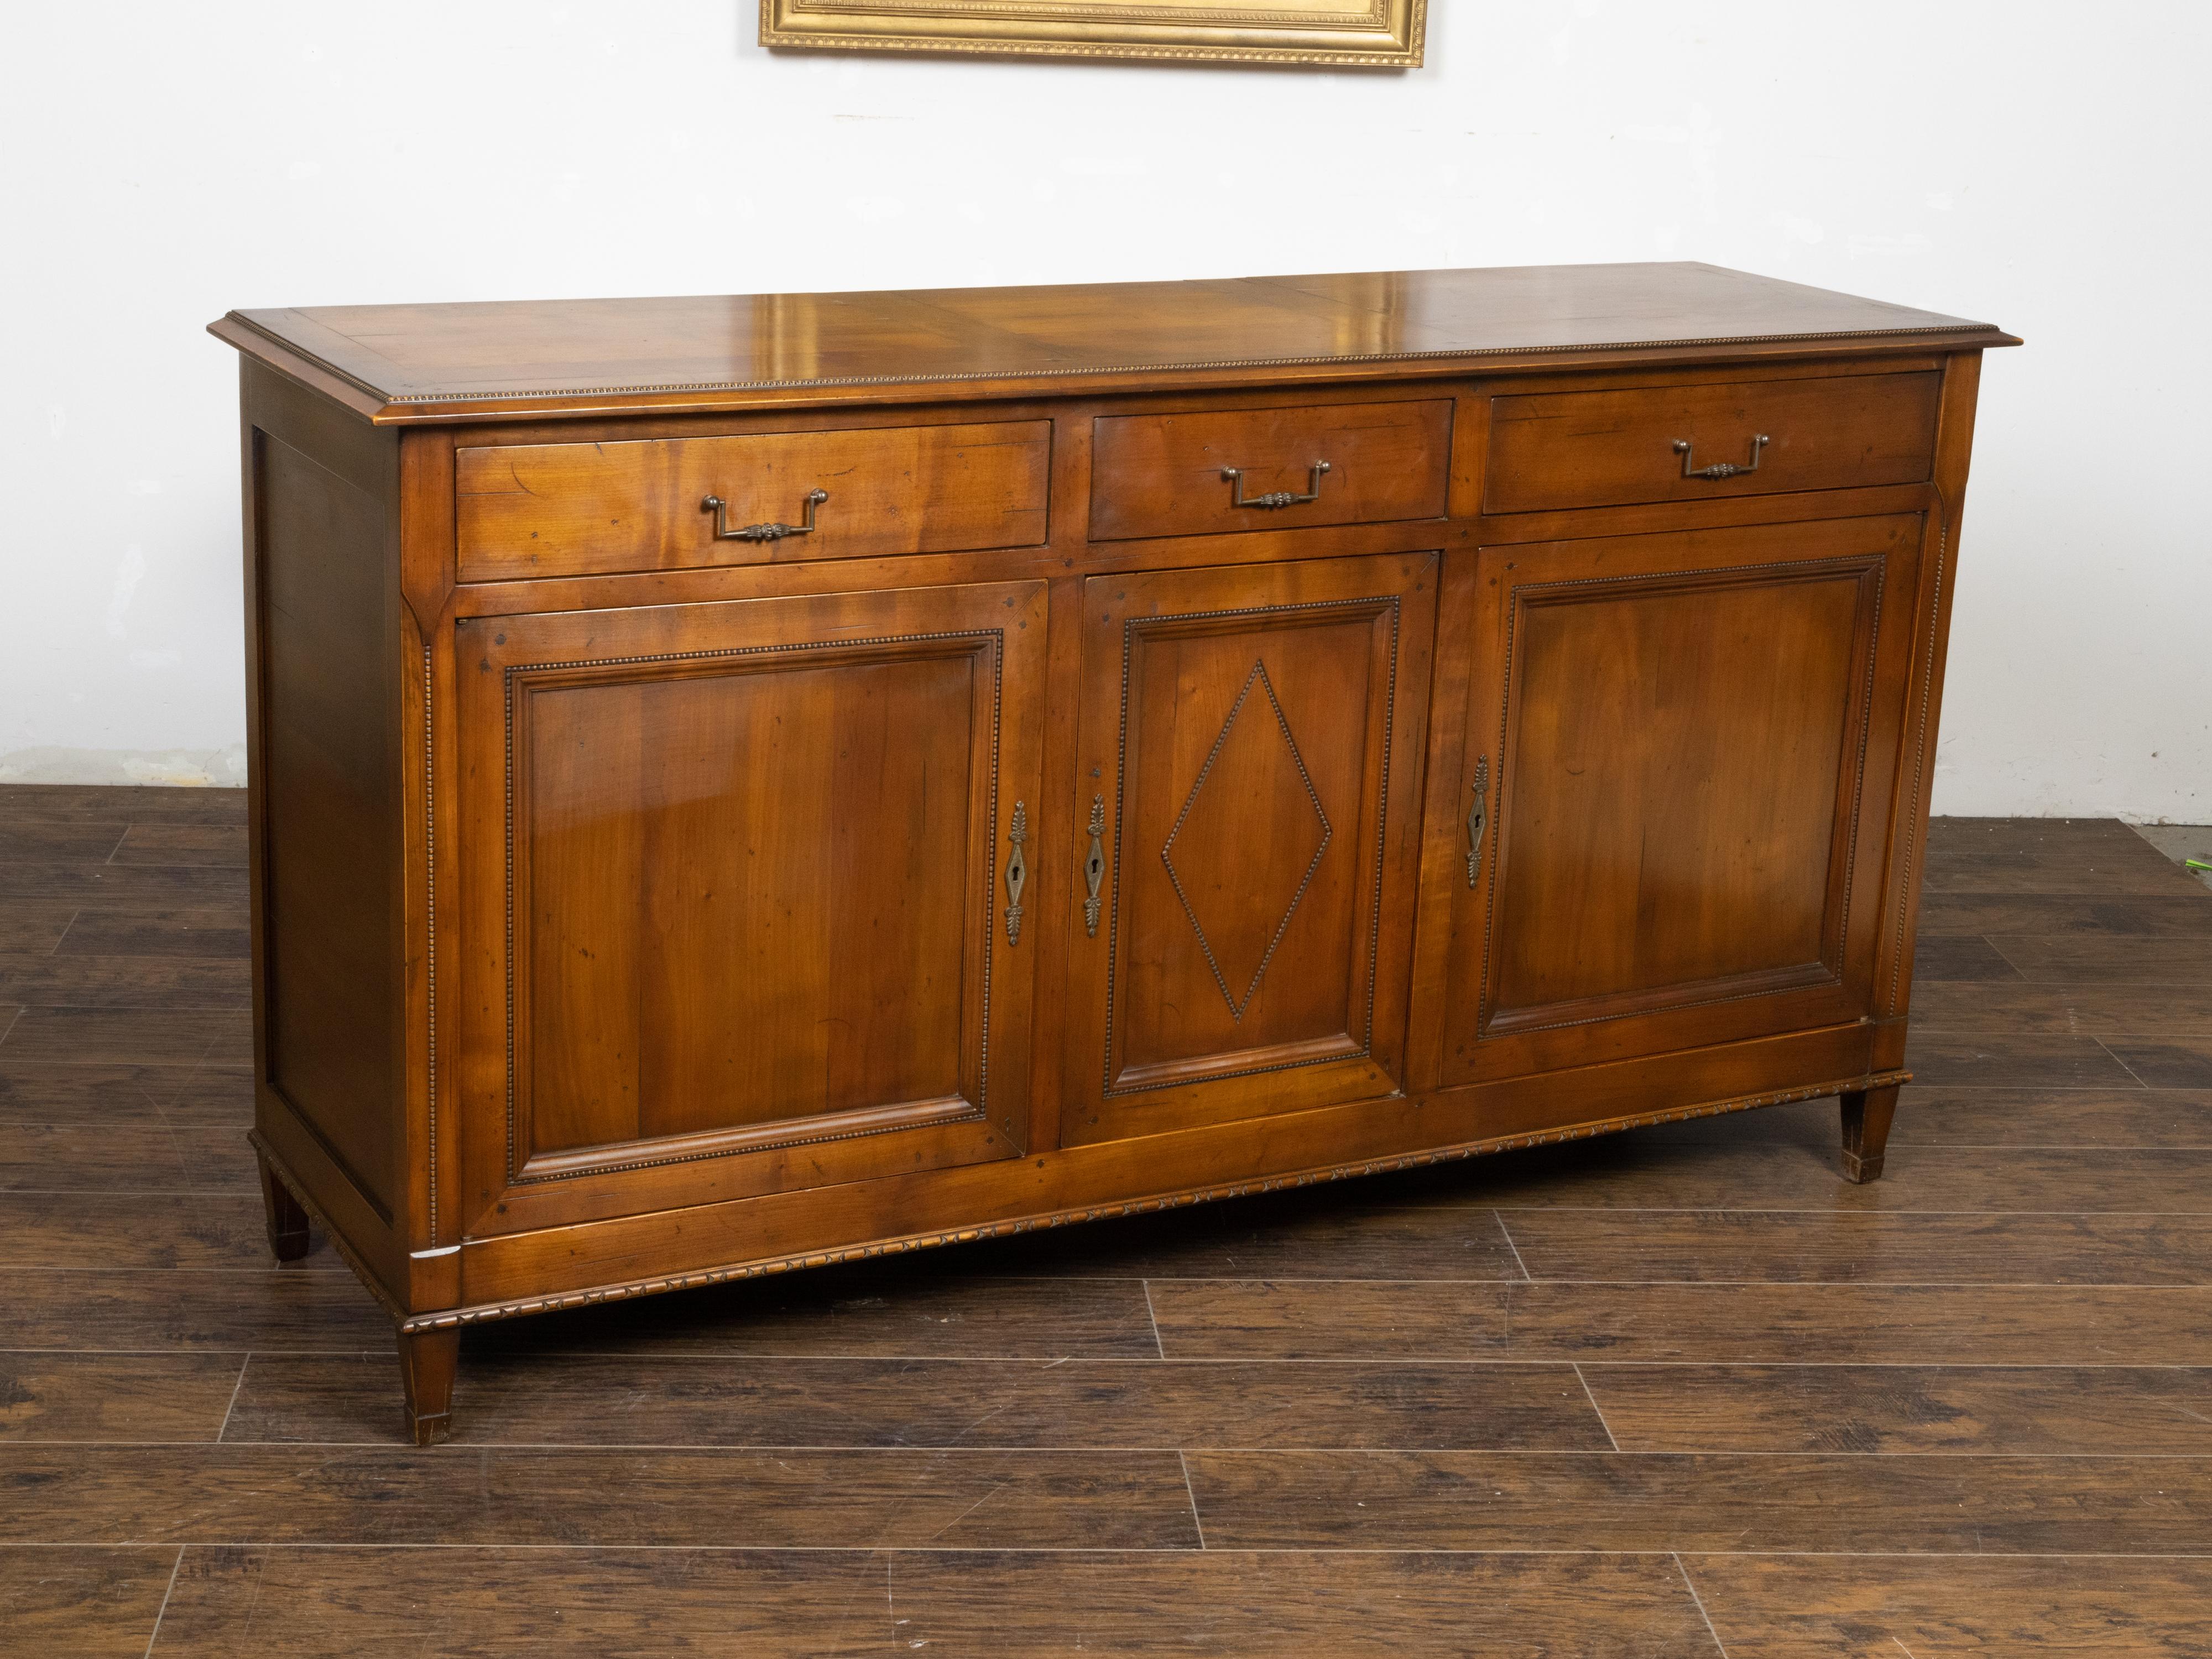 20th Century French 1940s Walnut Enfilade with Drawers, Doors, Carved Beads and Diamond Motif For Sale